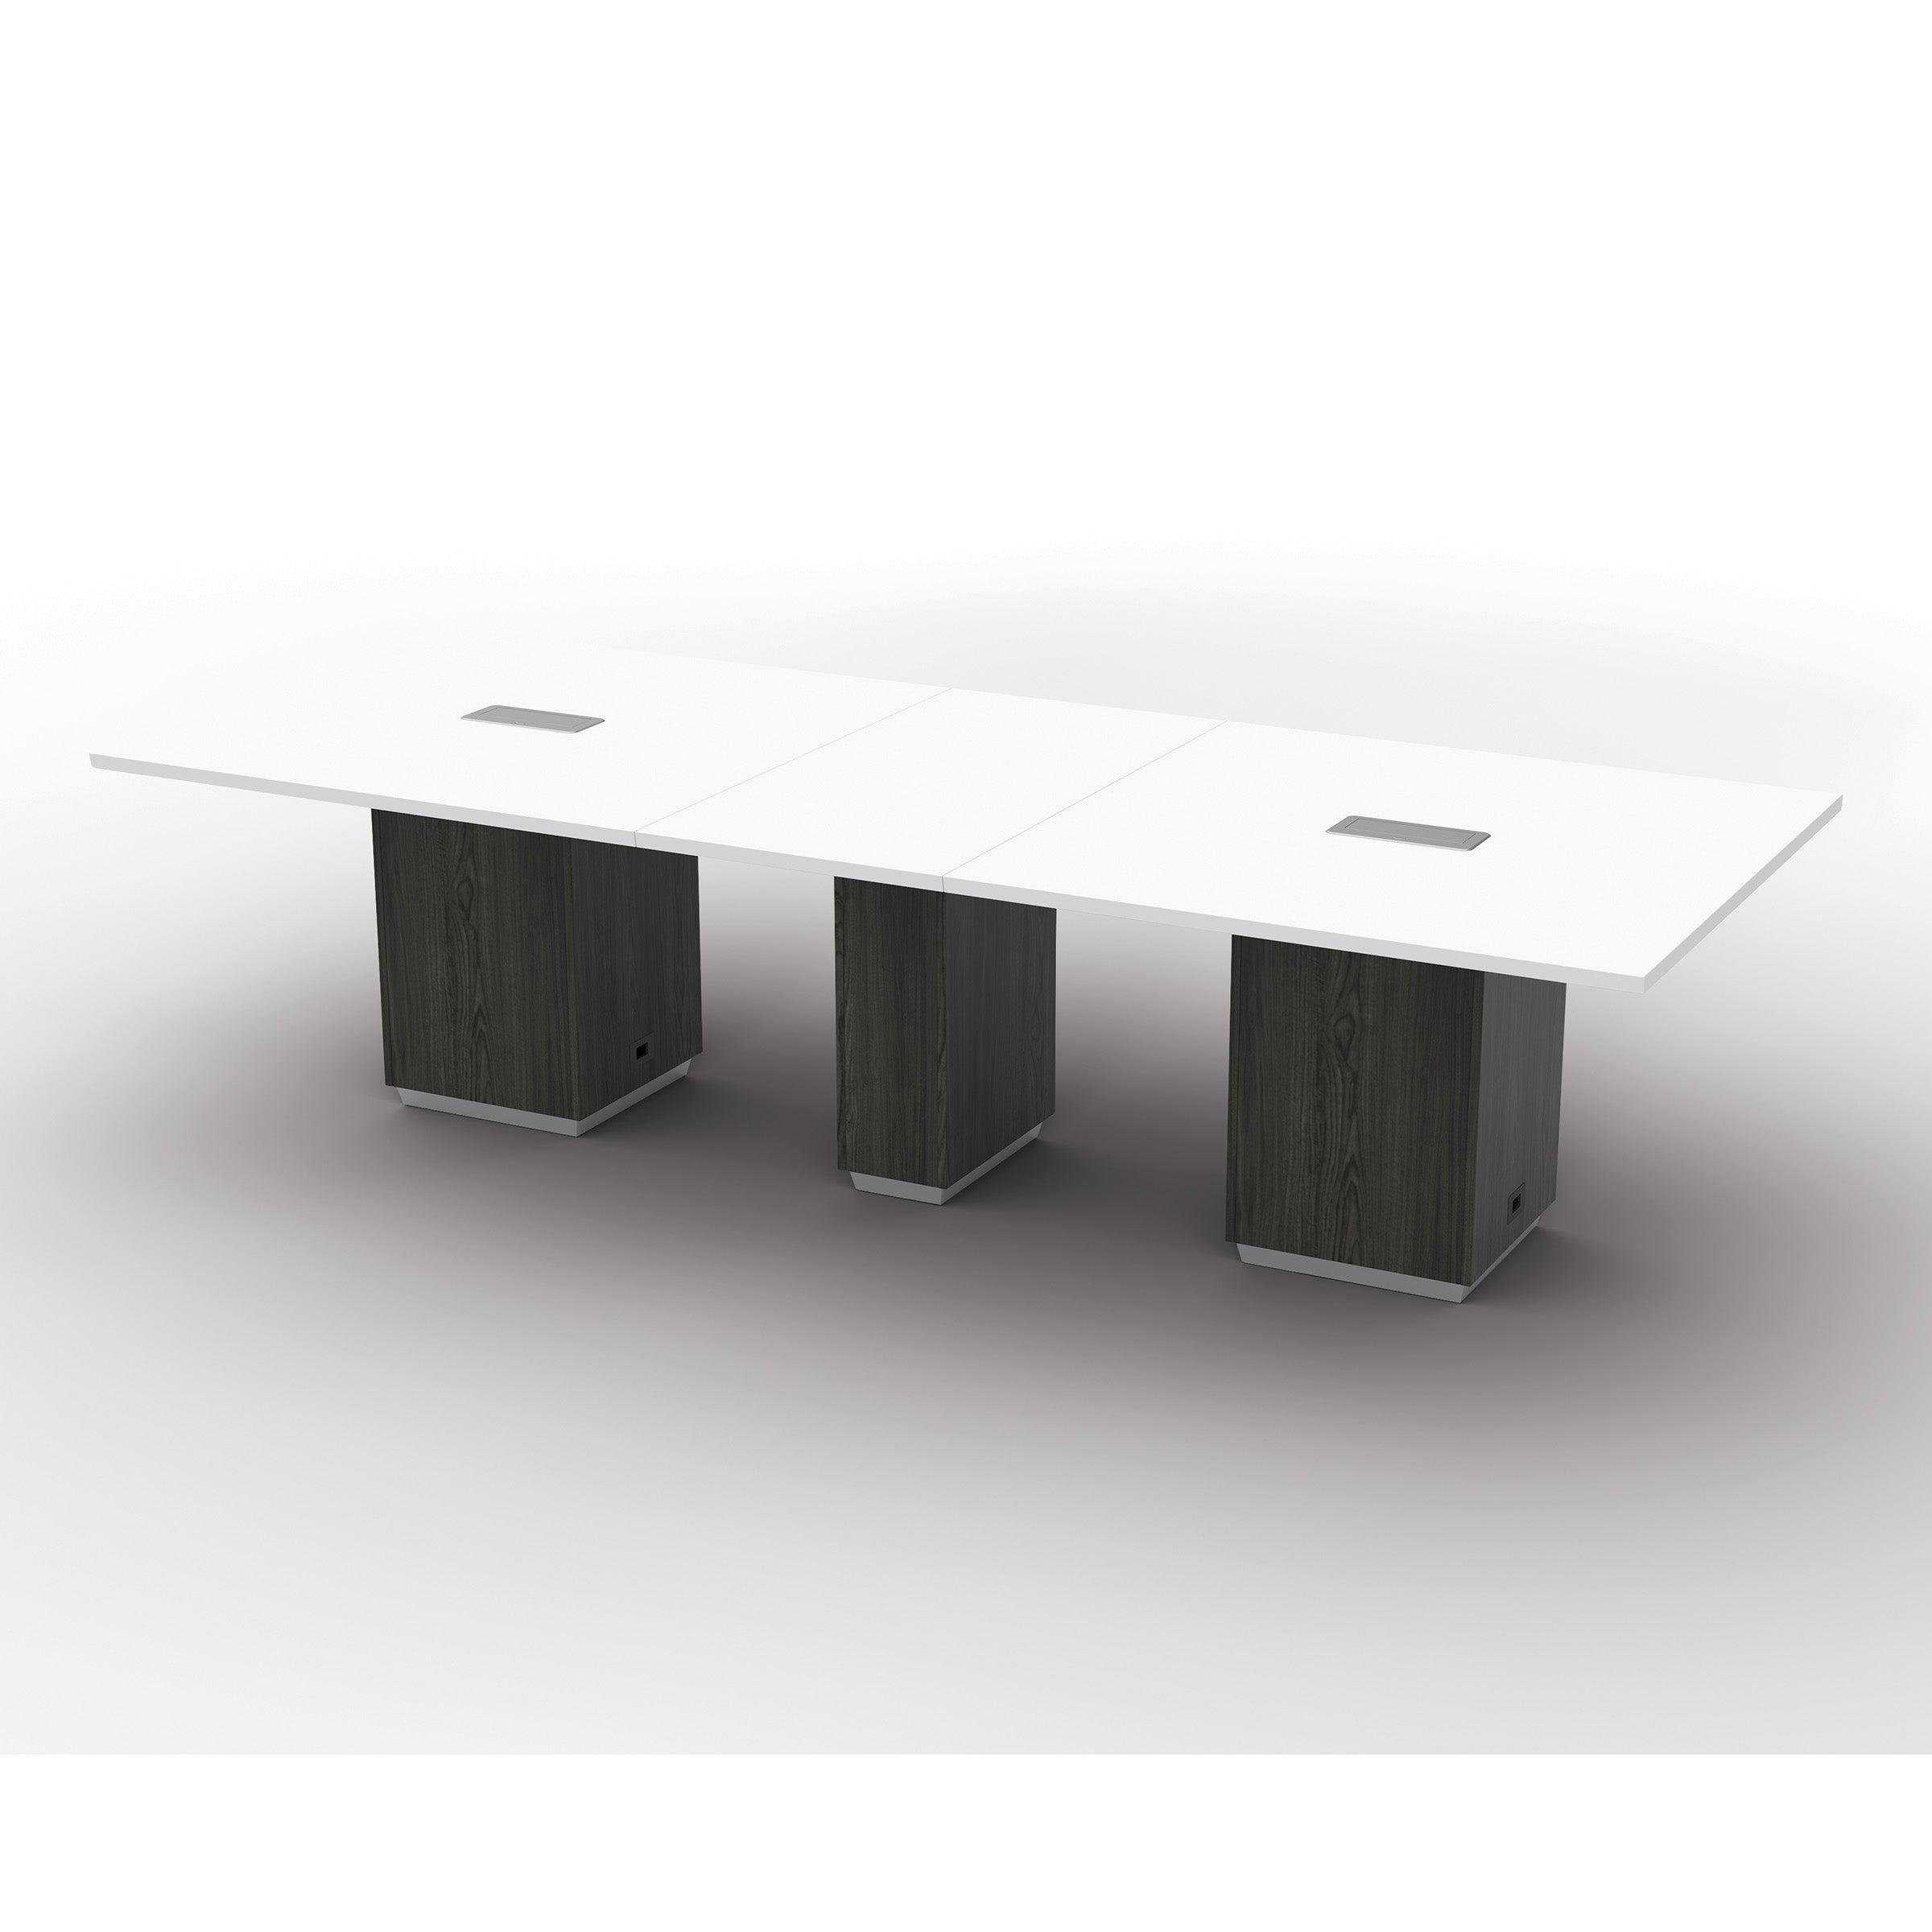 TUX61 - Tuxedo 10' Conference Table by OSP